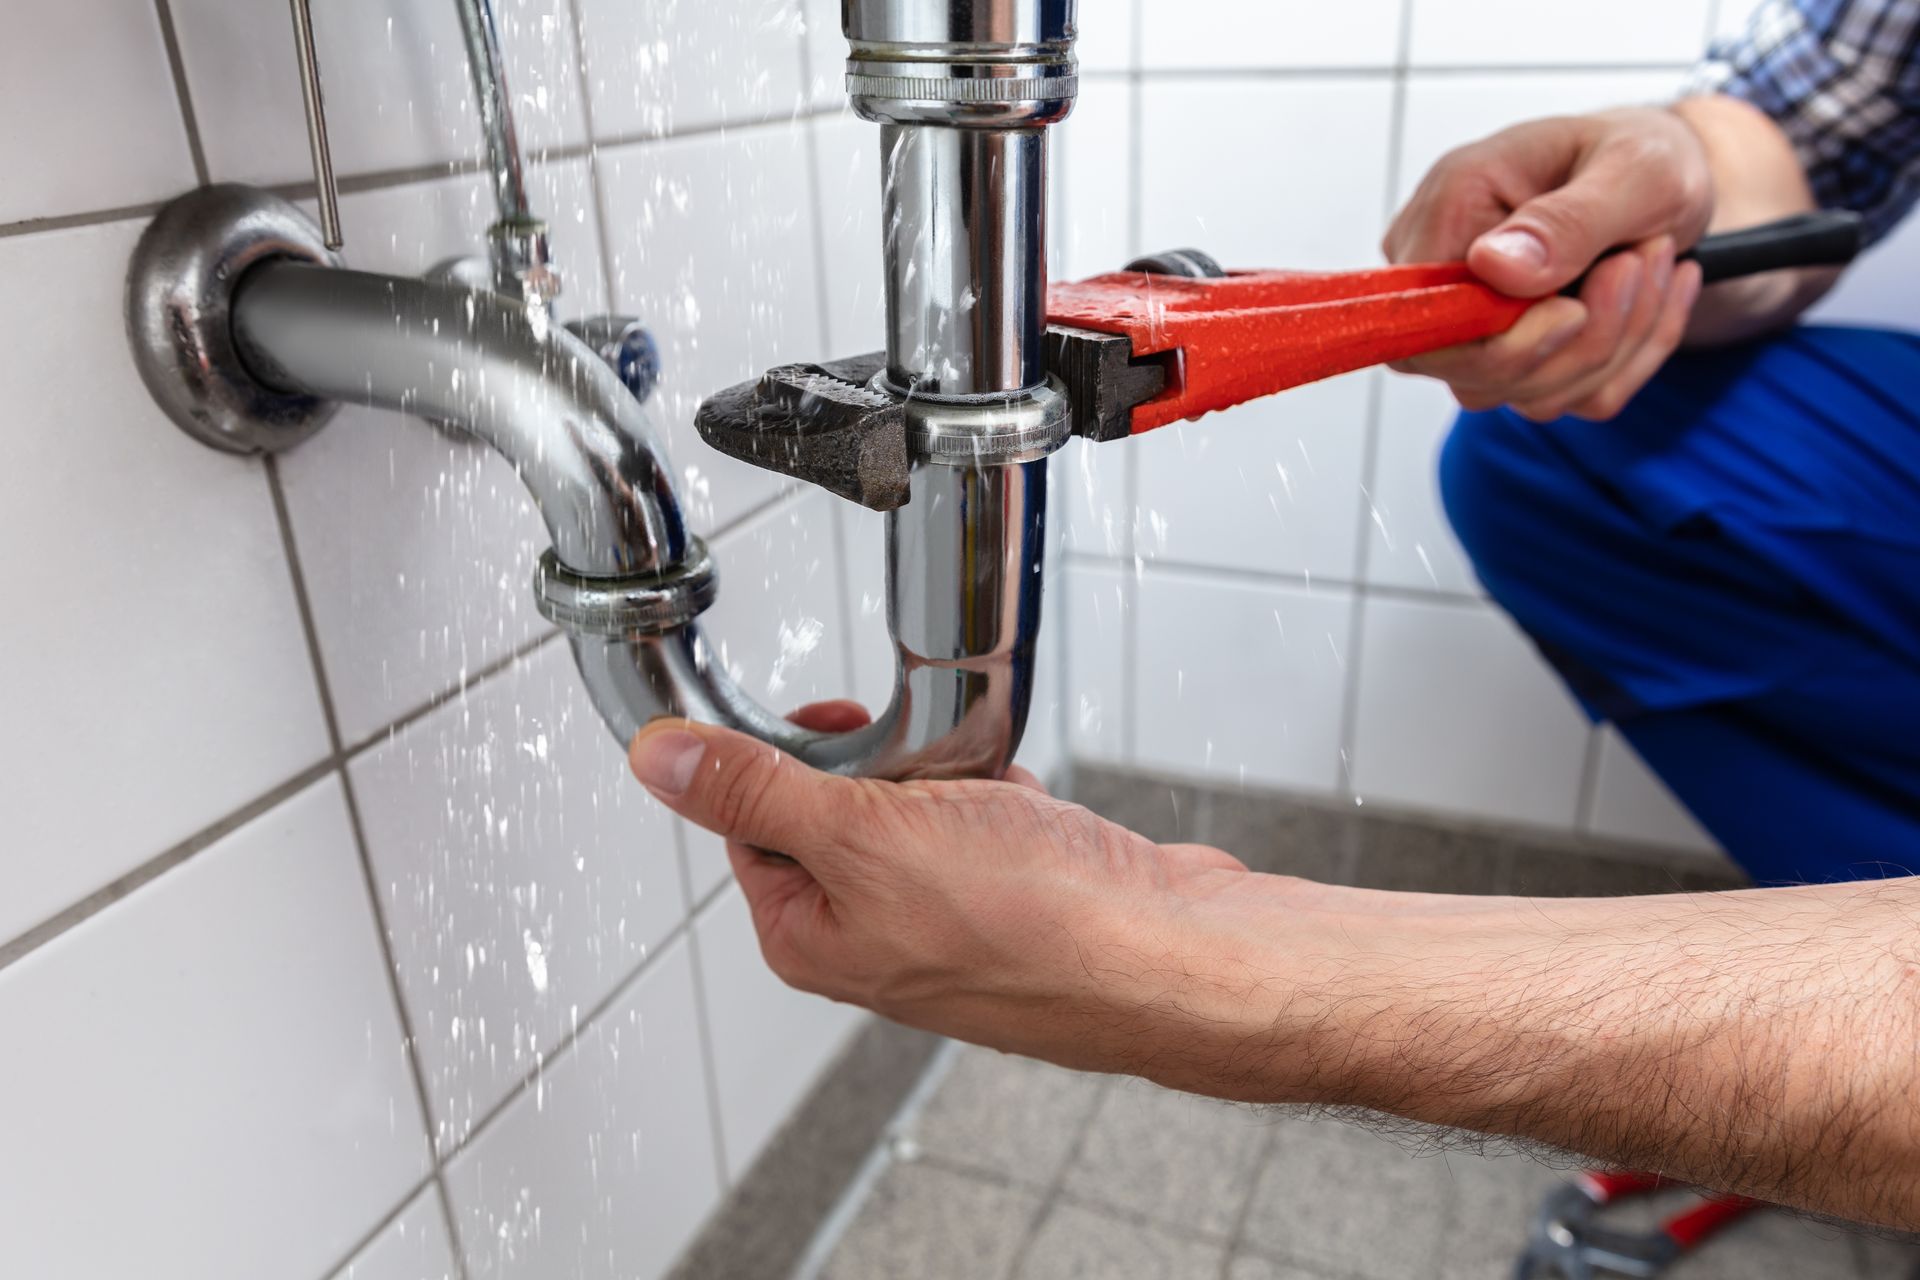 A handyman is diligently repairing a sink pipe leakage, using tools and materials to fix the problem and prevent further water damage.